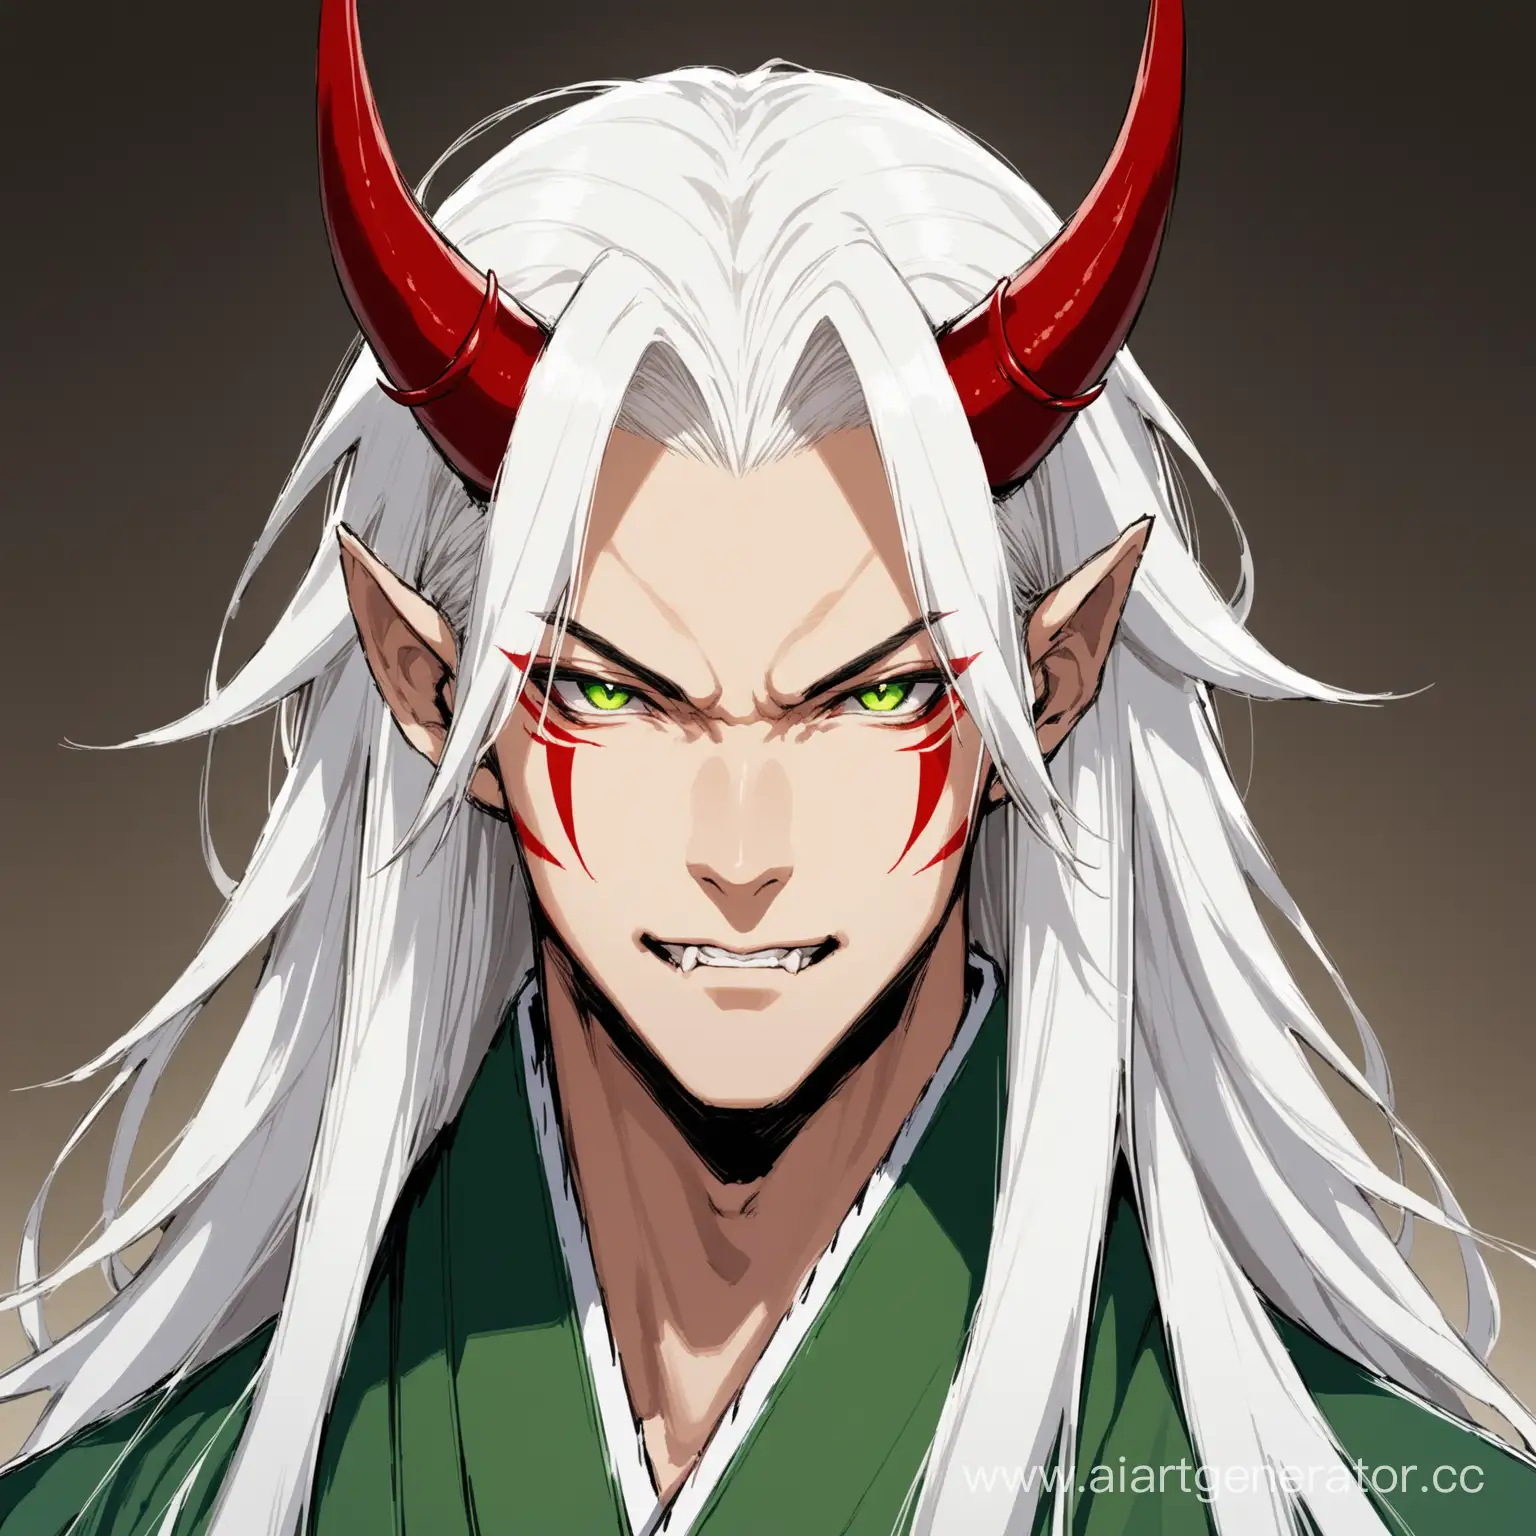 Portrait-of-a-Person-with-Long-White-Hair-Dyed-Green-and-Onilike-Horns